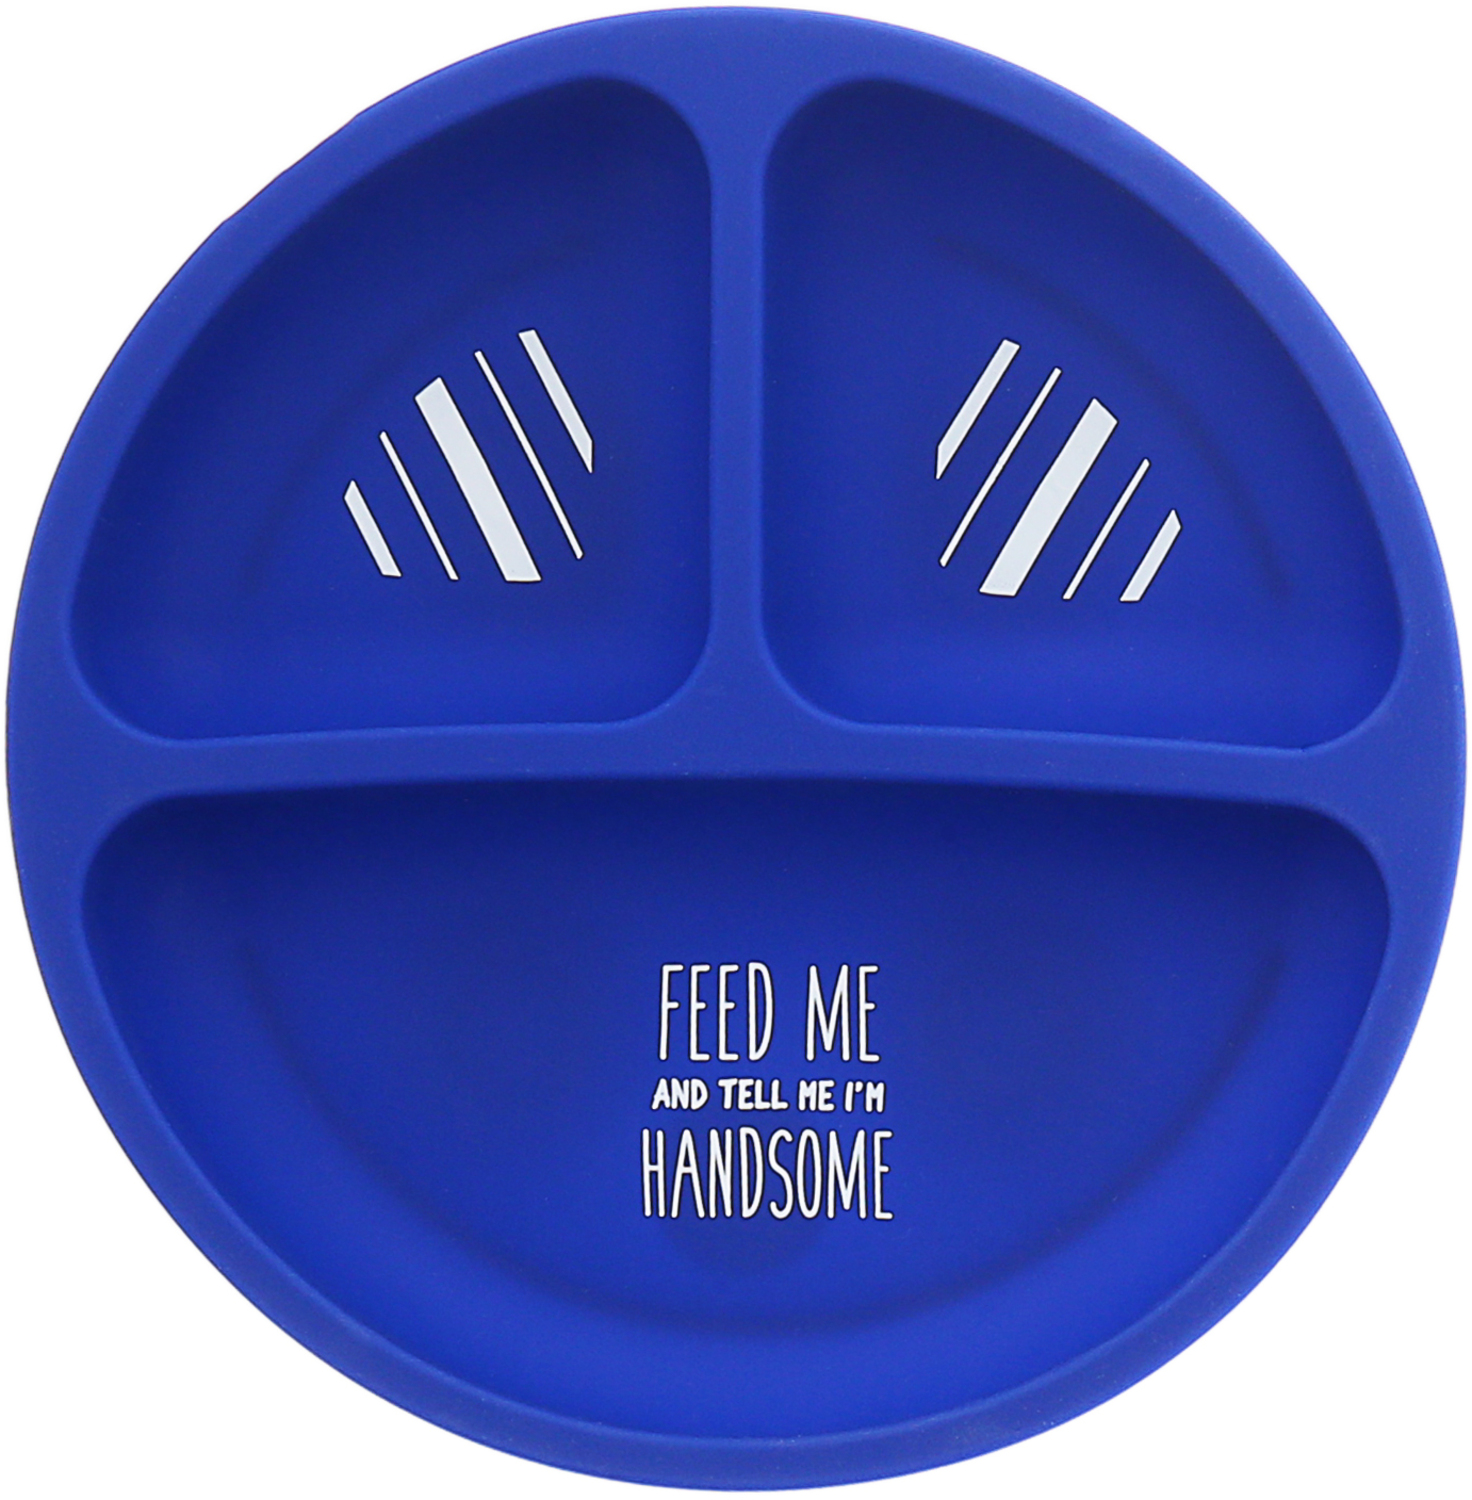 I'm Handsome by Sidewalk Talk - I'm Handsome - 7.75" Divided Silicone Suction Plate